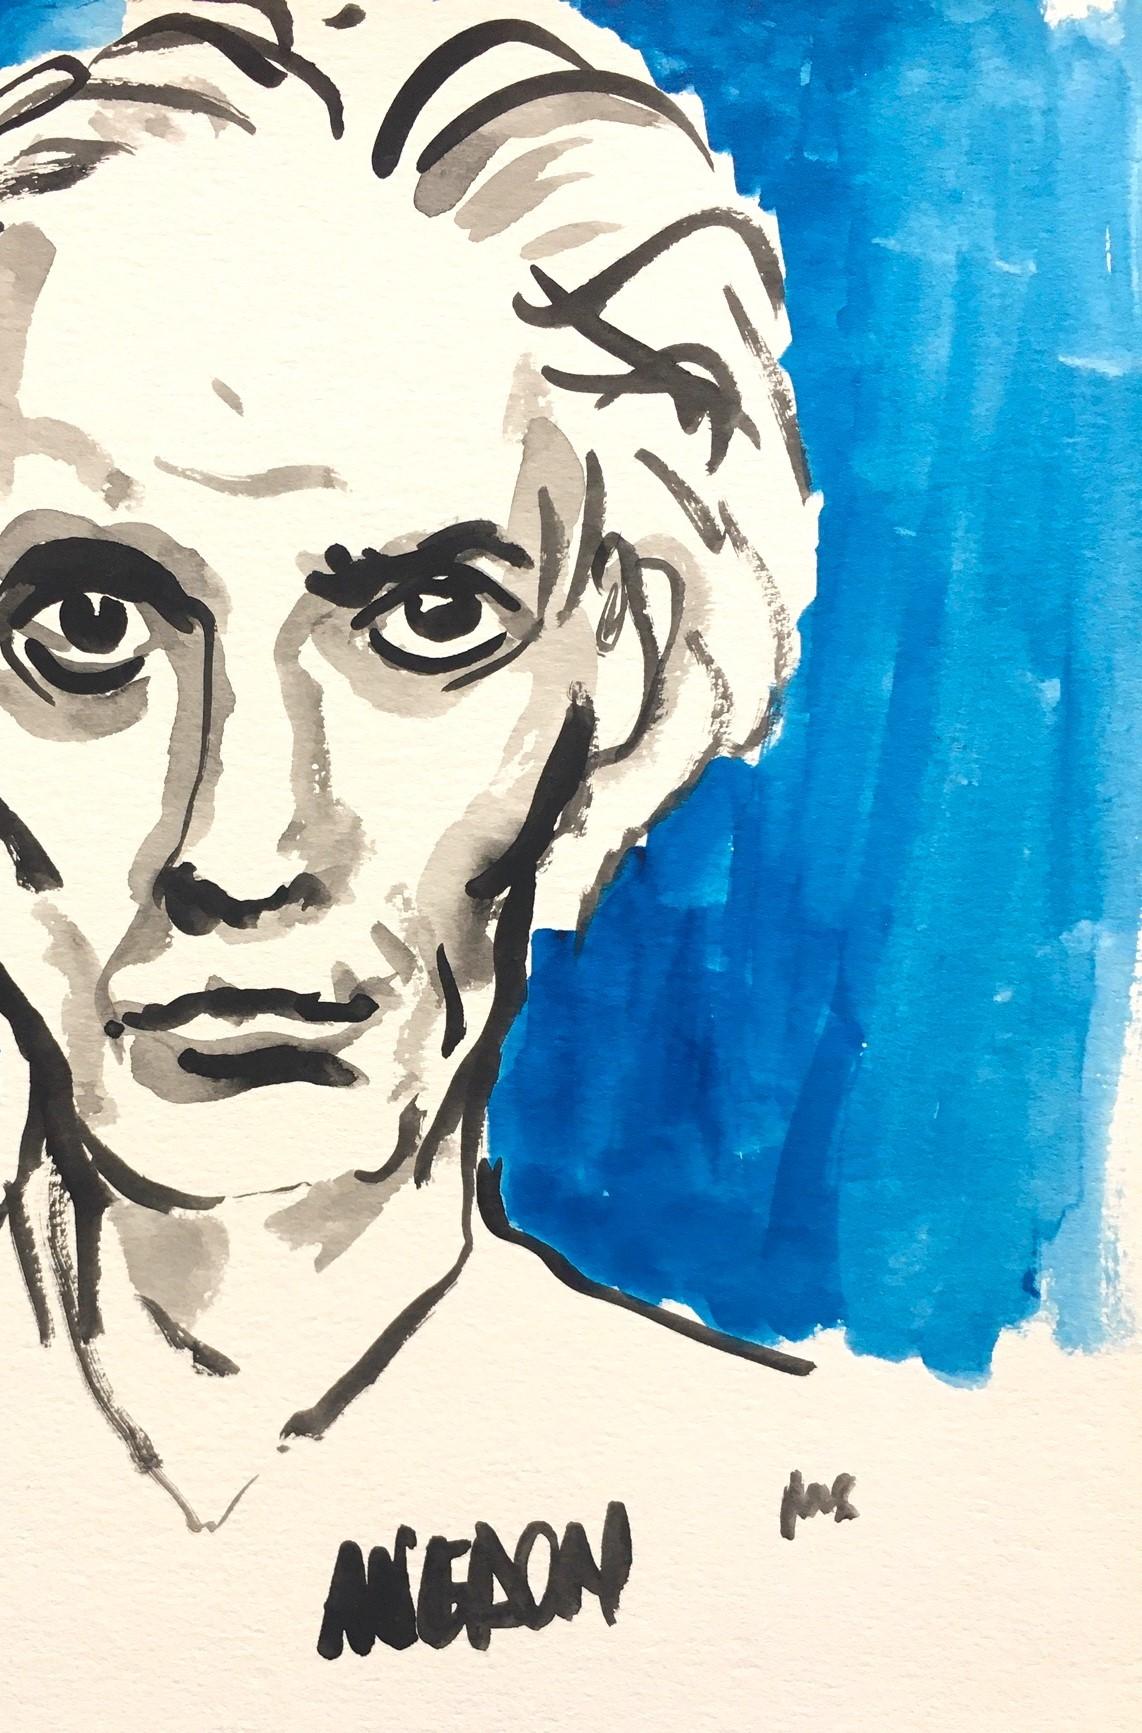 Portrait of American photographer Richard Avedon.  Watercolor and ink on paper  - Contemporary Art by Manuel Santelices